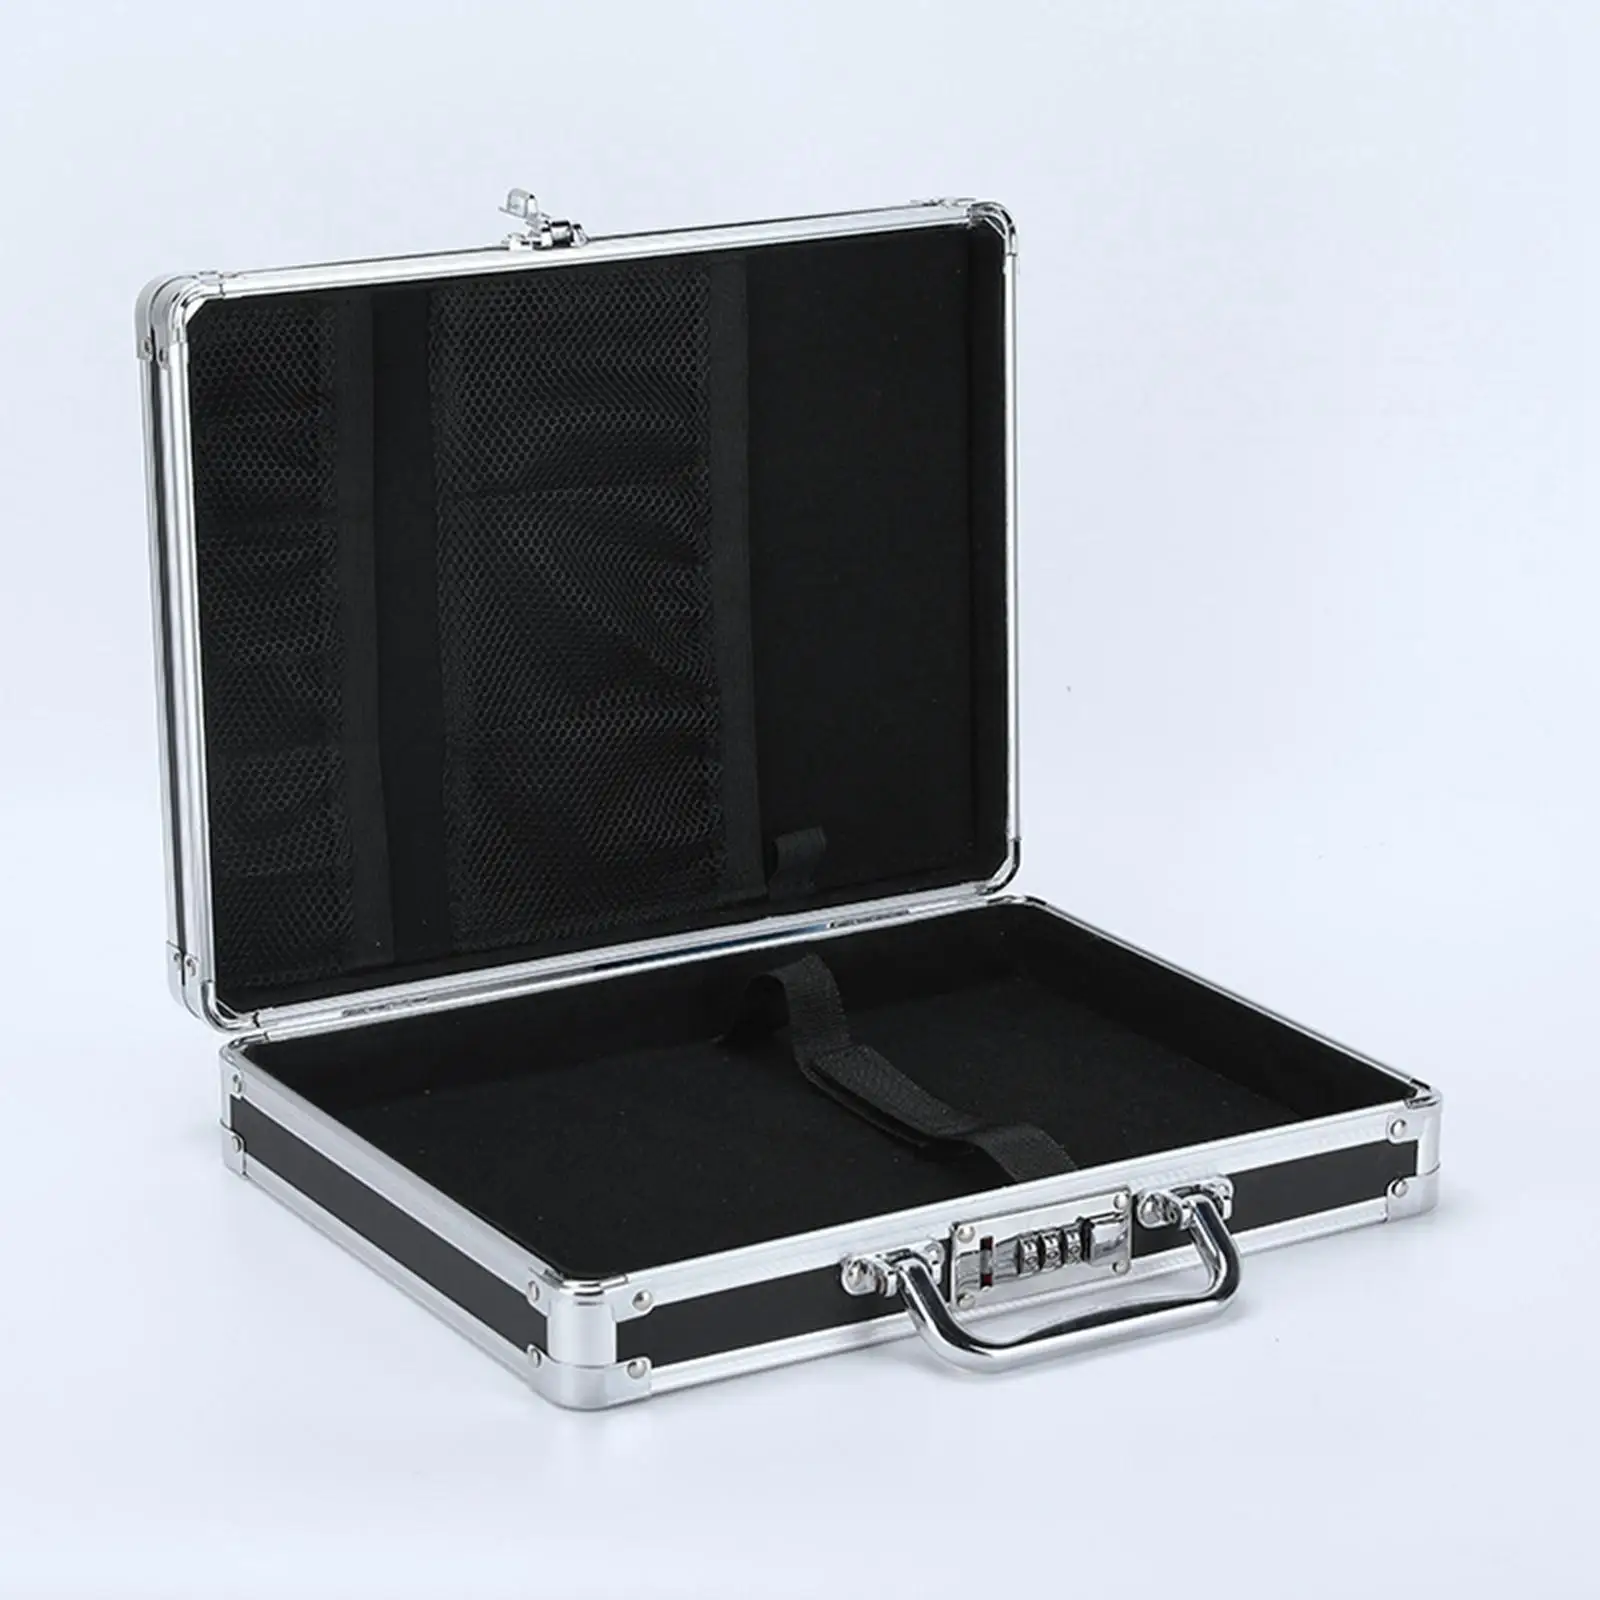 Aluminum Hard Case Aluminum Alloy Storage Case for Electronic Tools Storage Test Instruments Cameras Tools Parts and Accessories